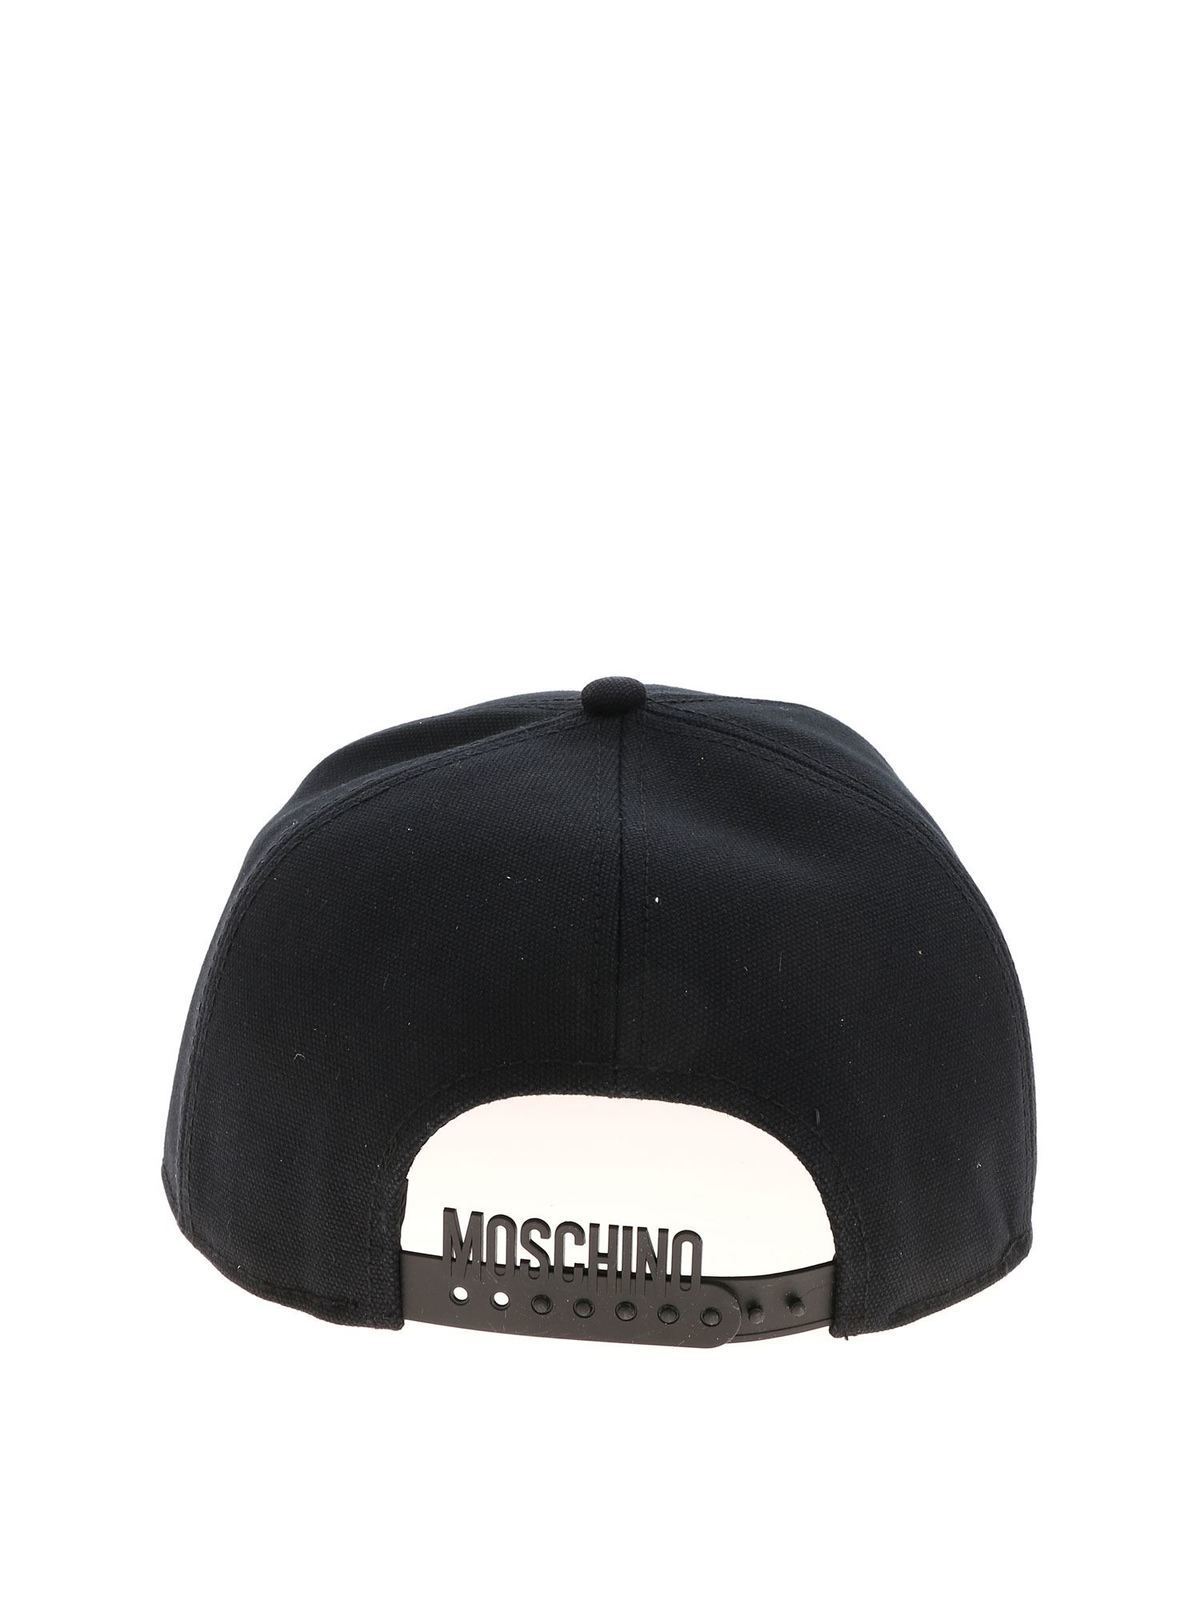 Hats & caps Moschino - Double Question Mark cap in black - 92068266555